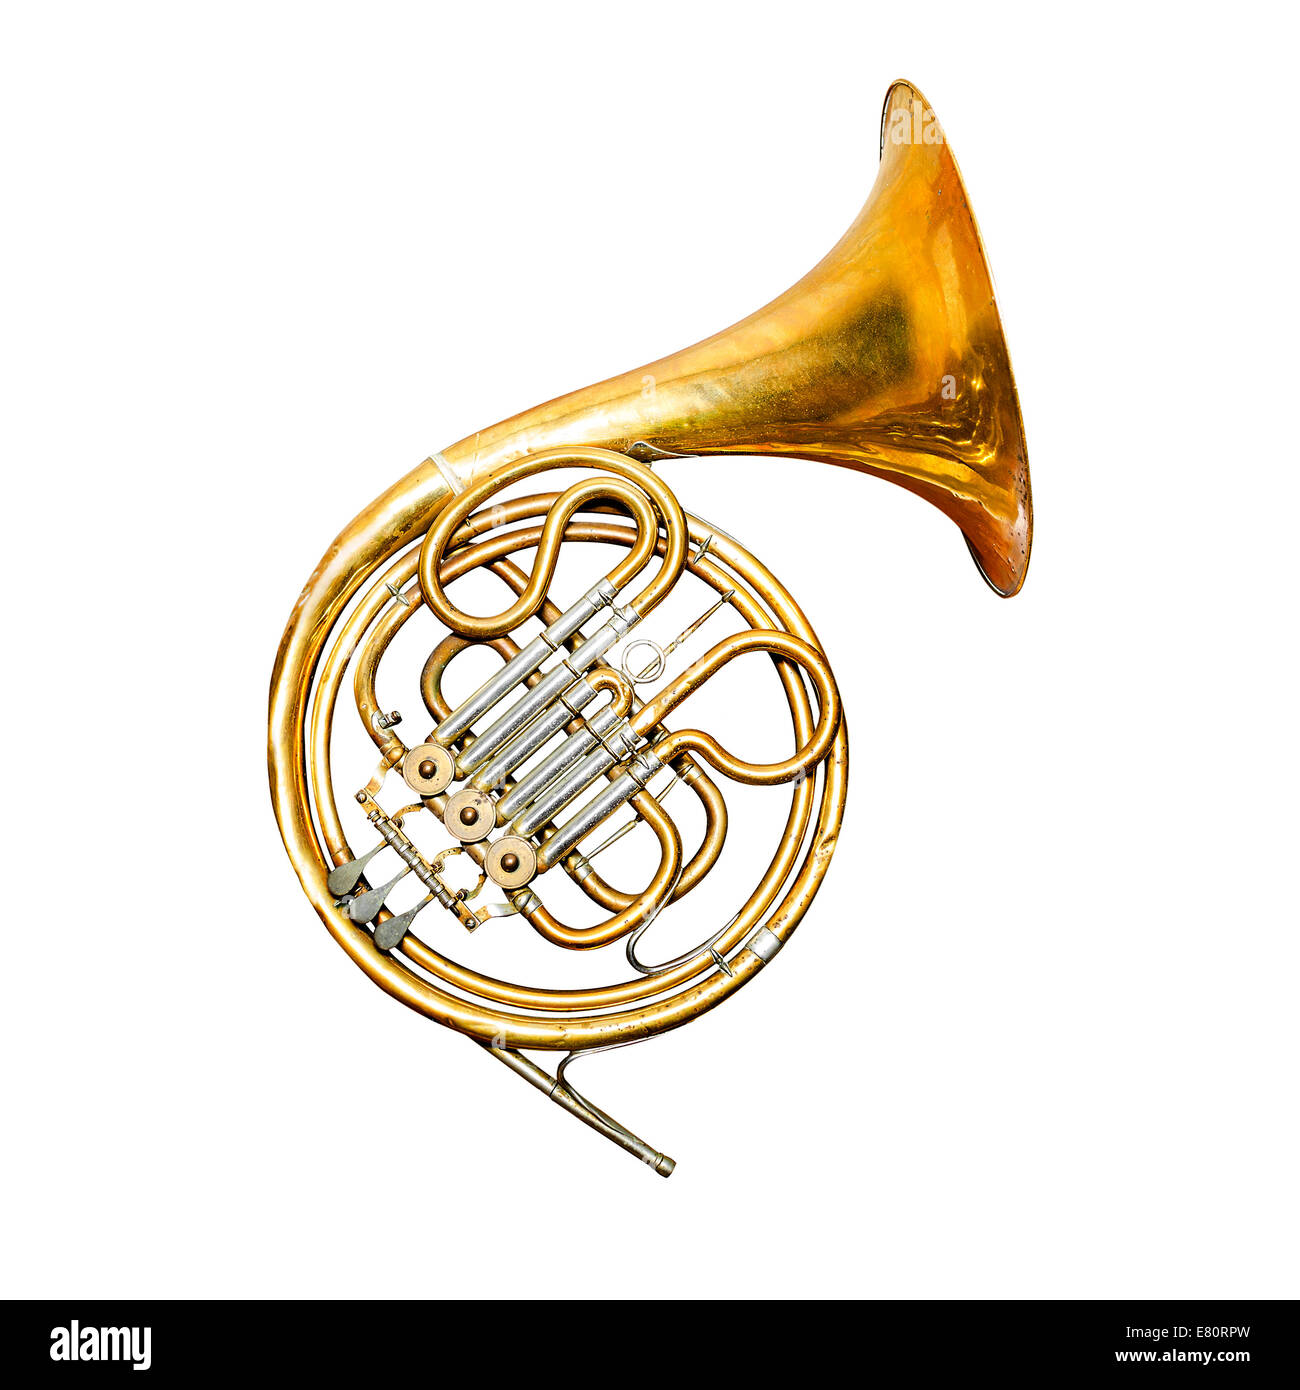 Golden trumpet isolated on a white background Stock Photo